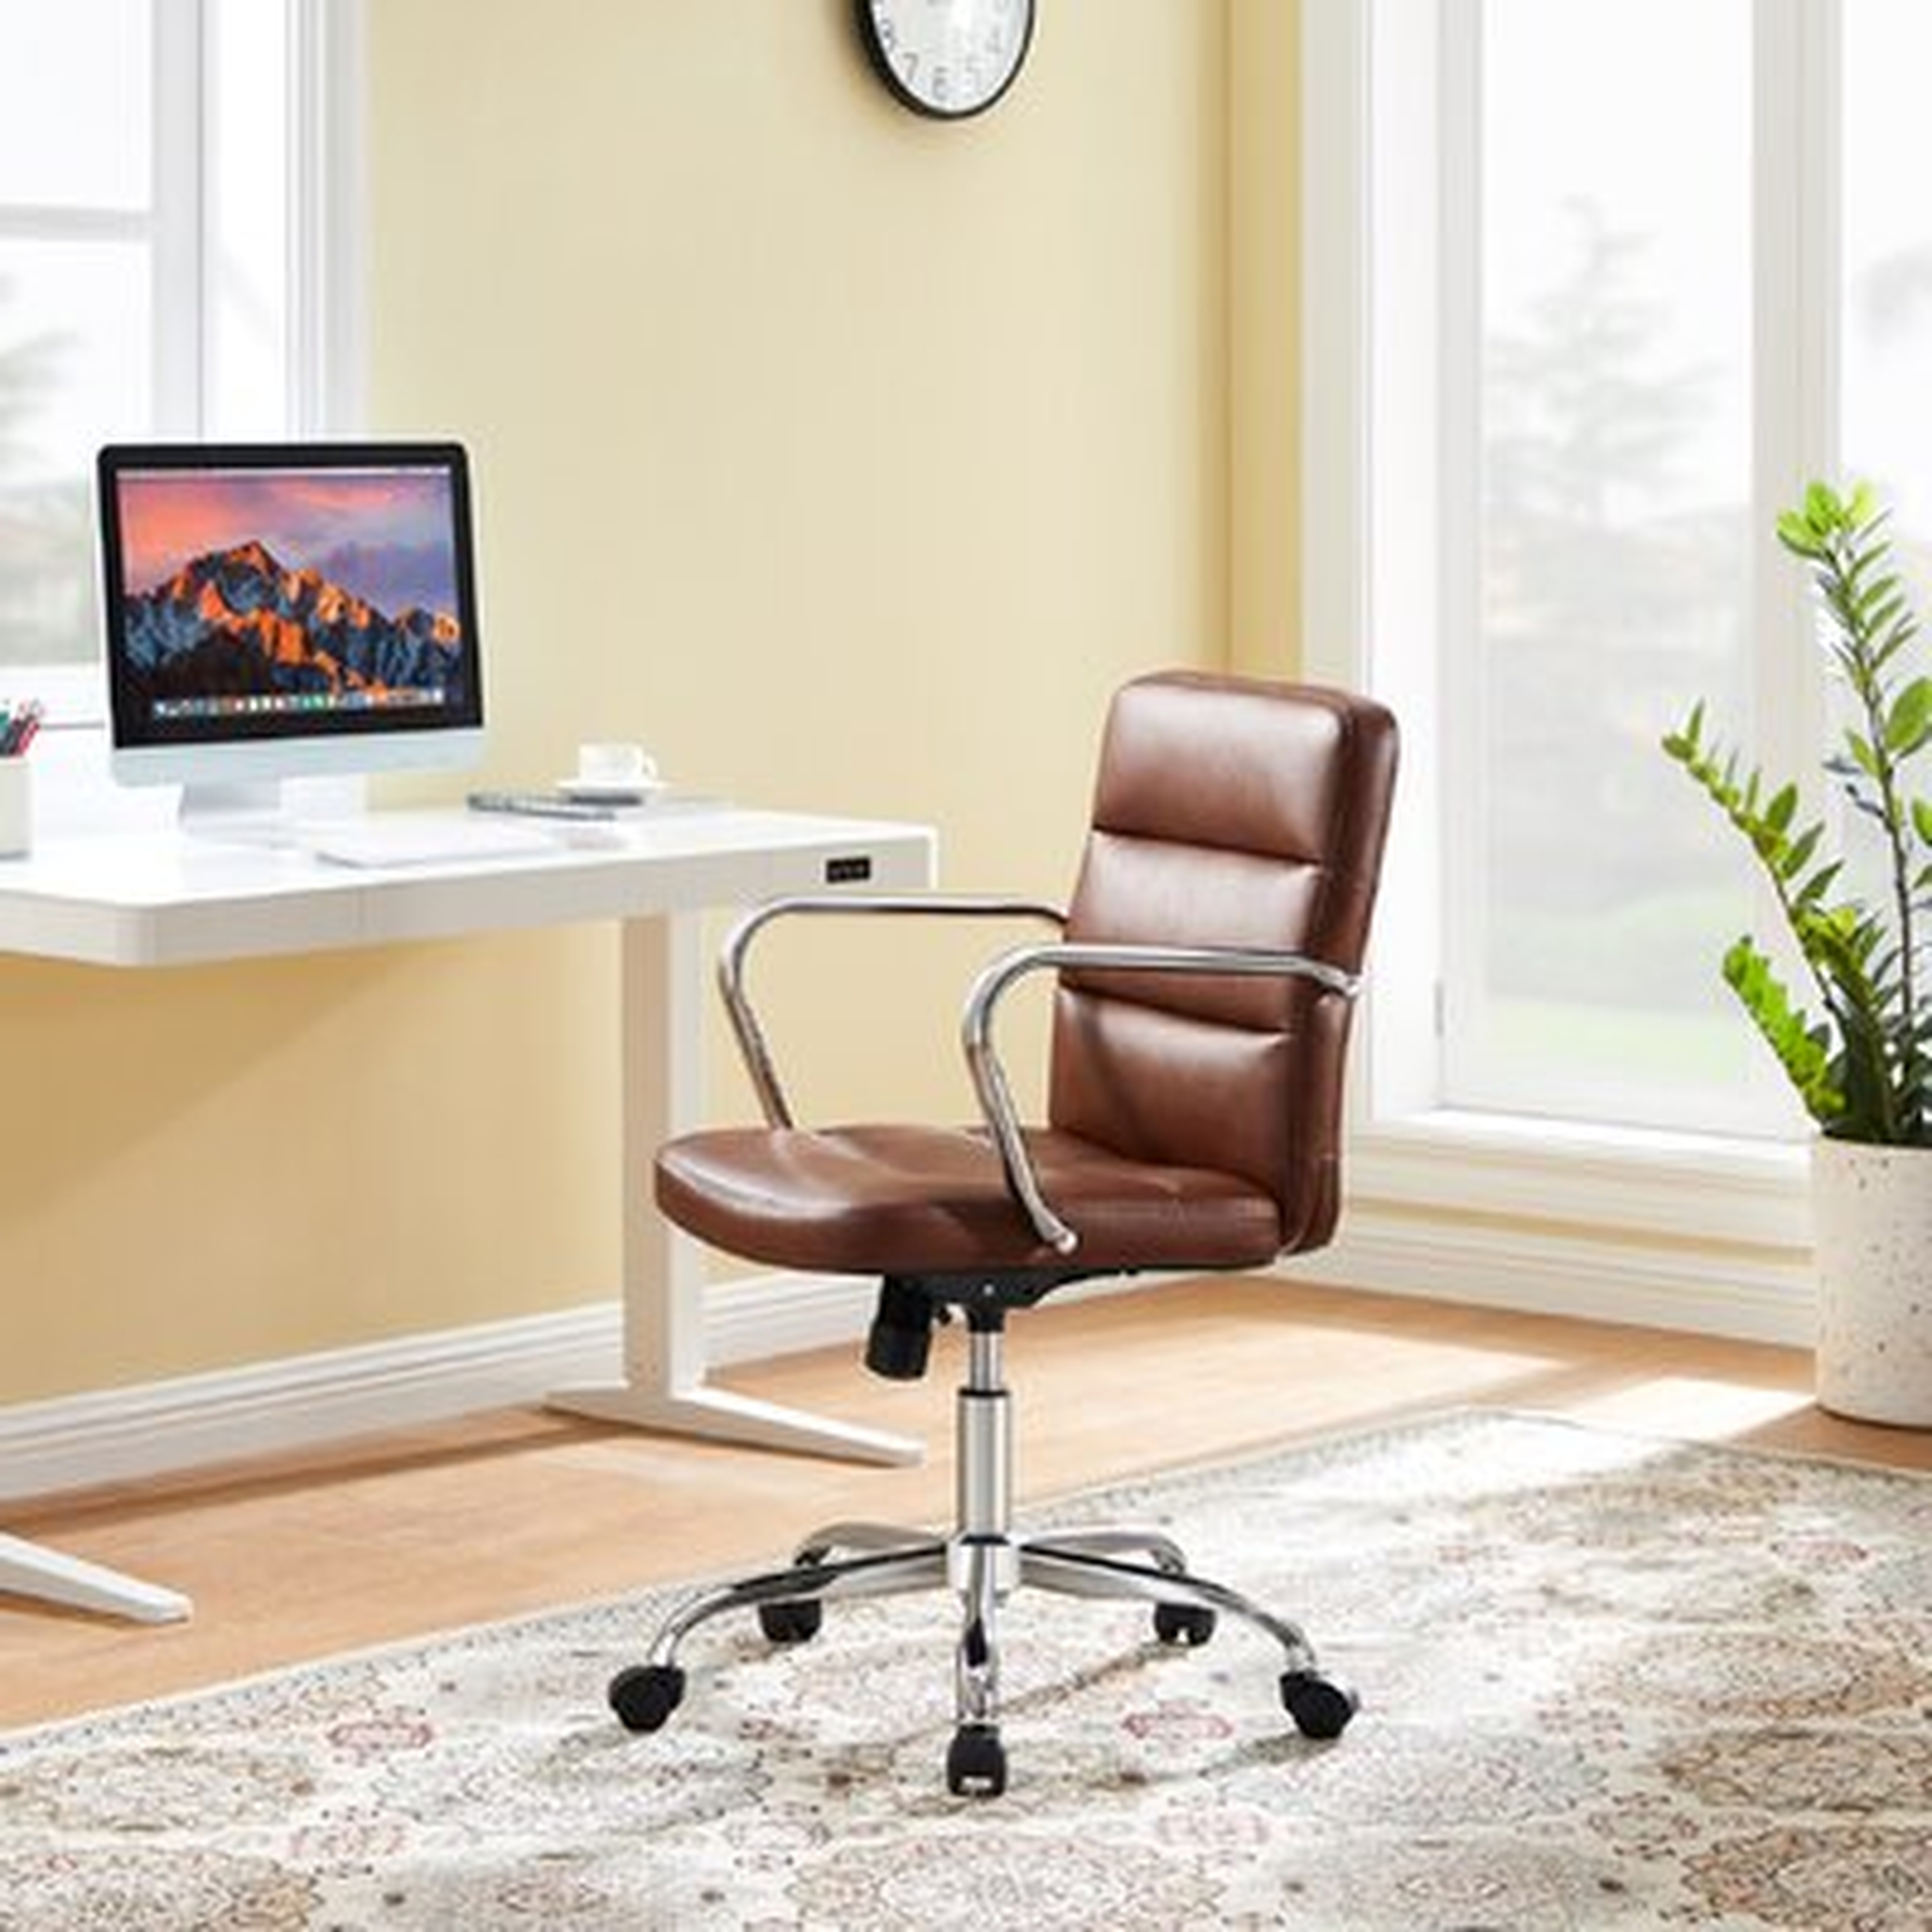 LITTLE TREE Conference Chair Office Chair - Wayfair